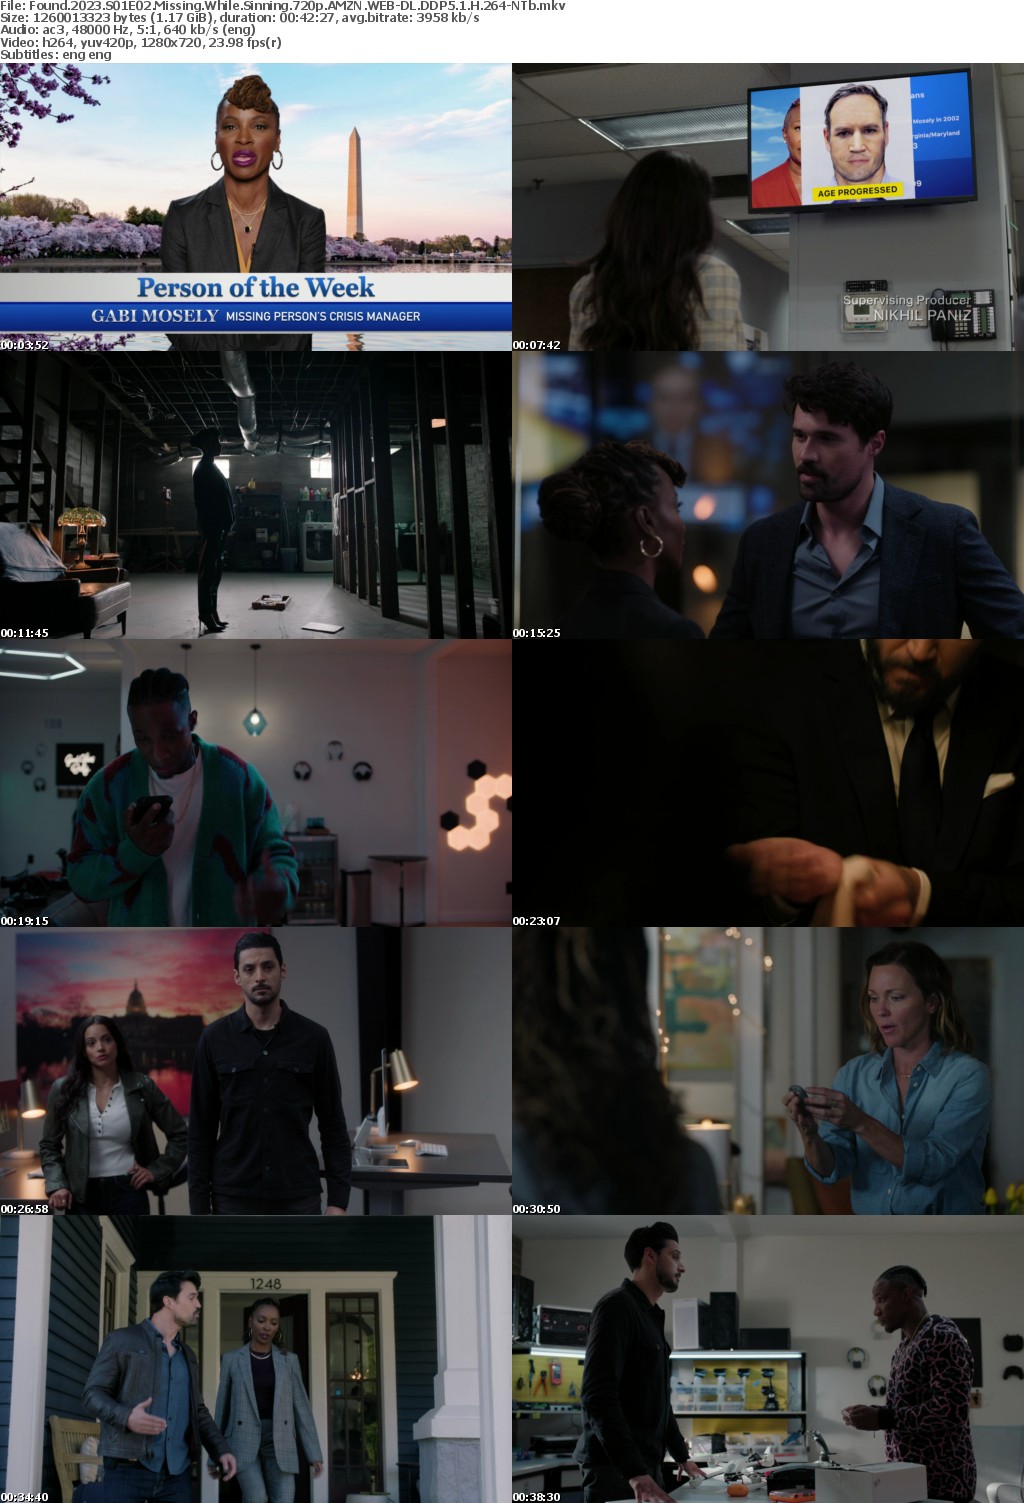 Found 2023 S01E02 Missing While Sinning 720p AMZN WEB-DL DDP5 1 H 264-NTb